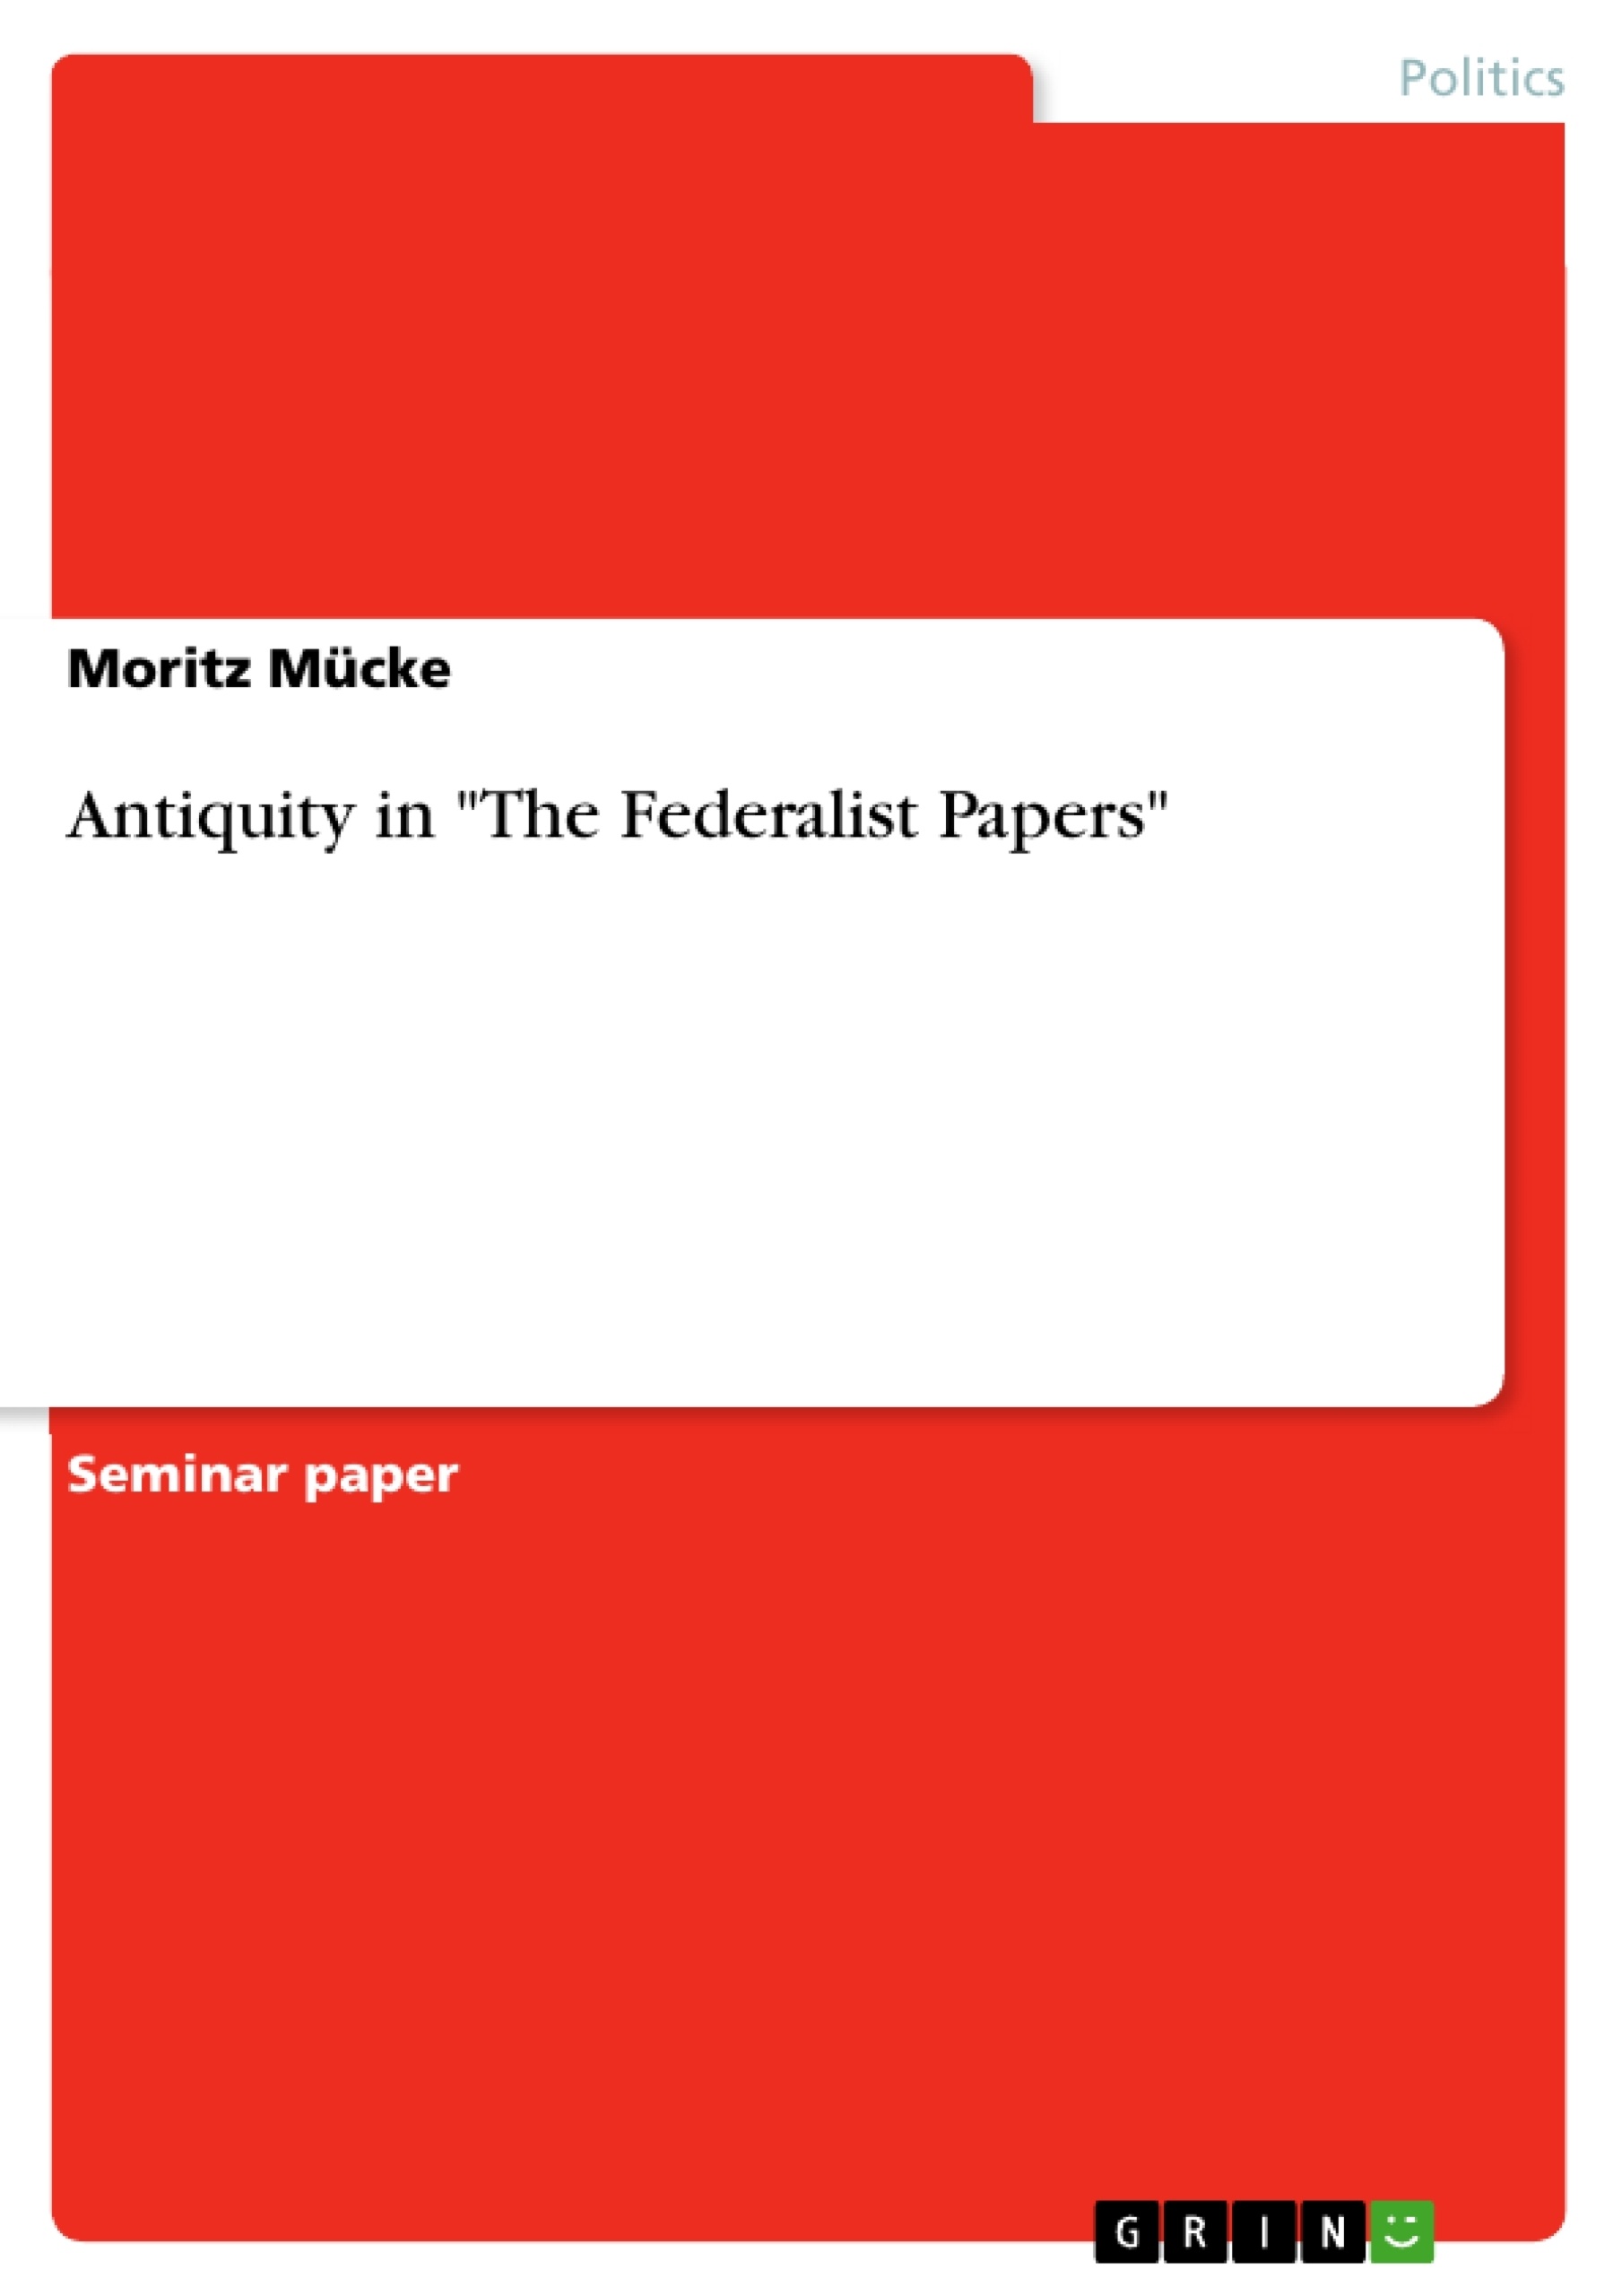 Titre: Antiquity in "The Federalist Papers"